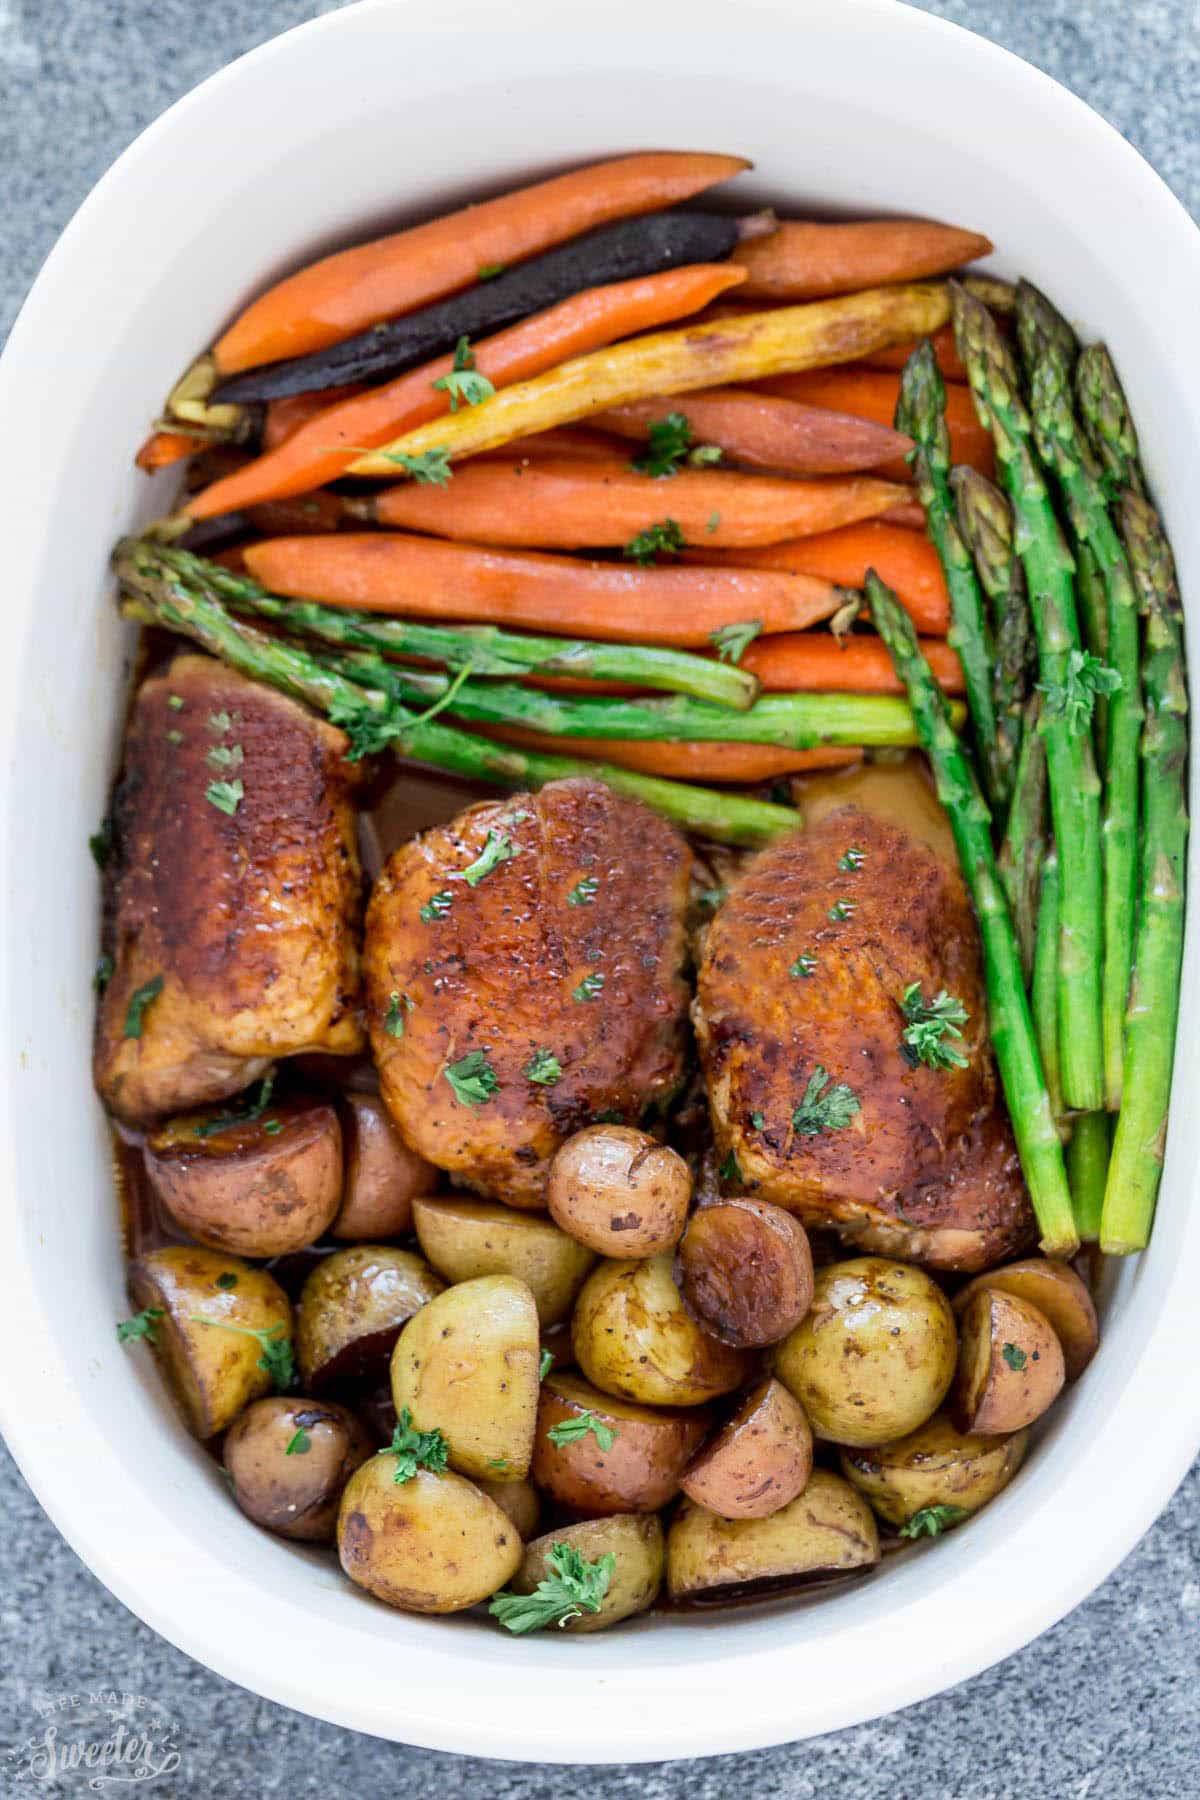 Slow Cooker Autumn Harvest Chicken and Vegetables Photo Recipe (9)